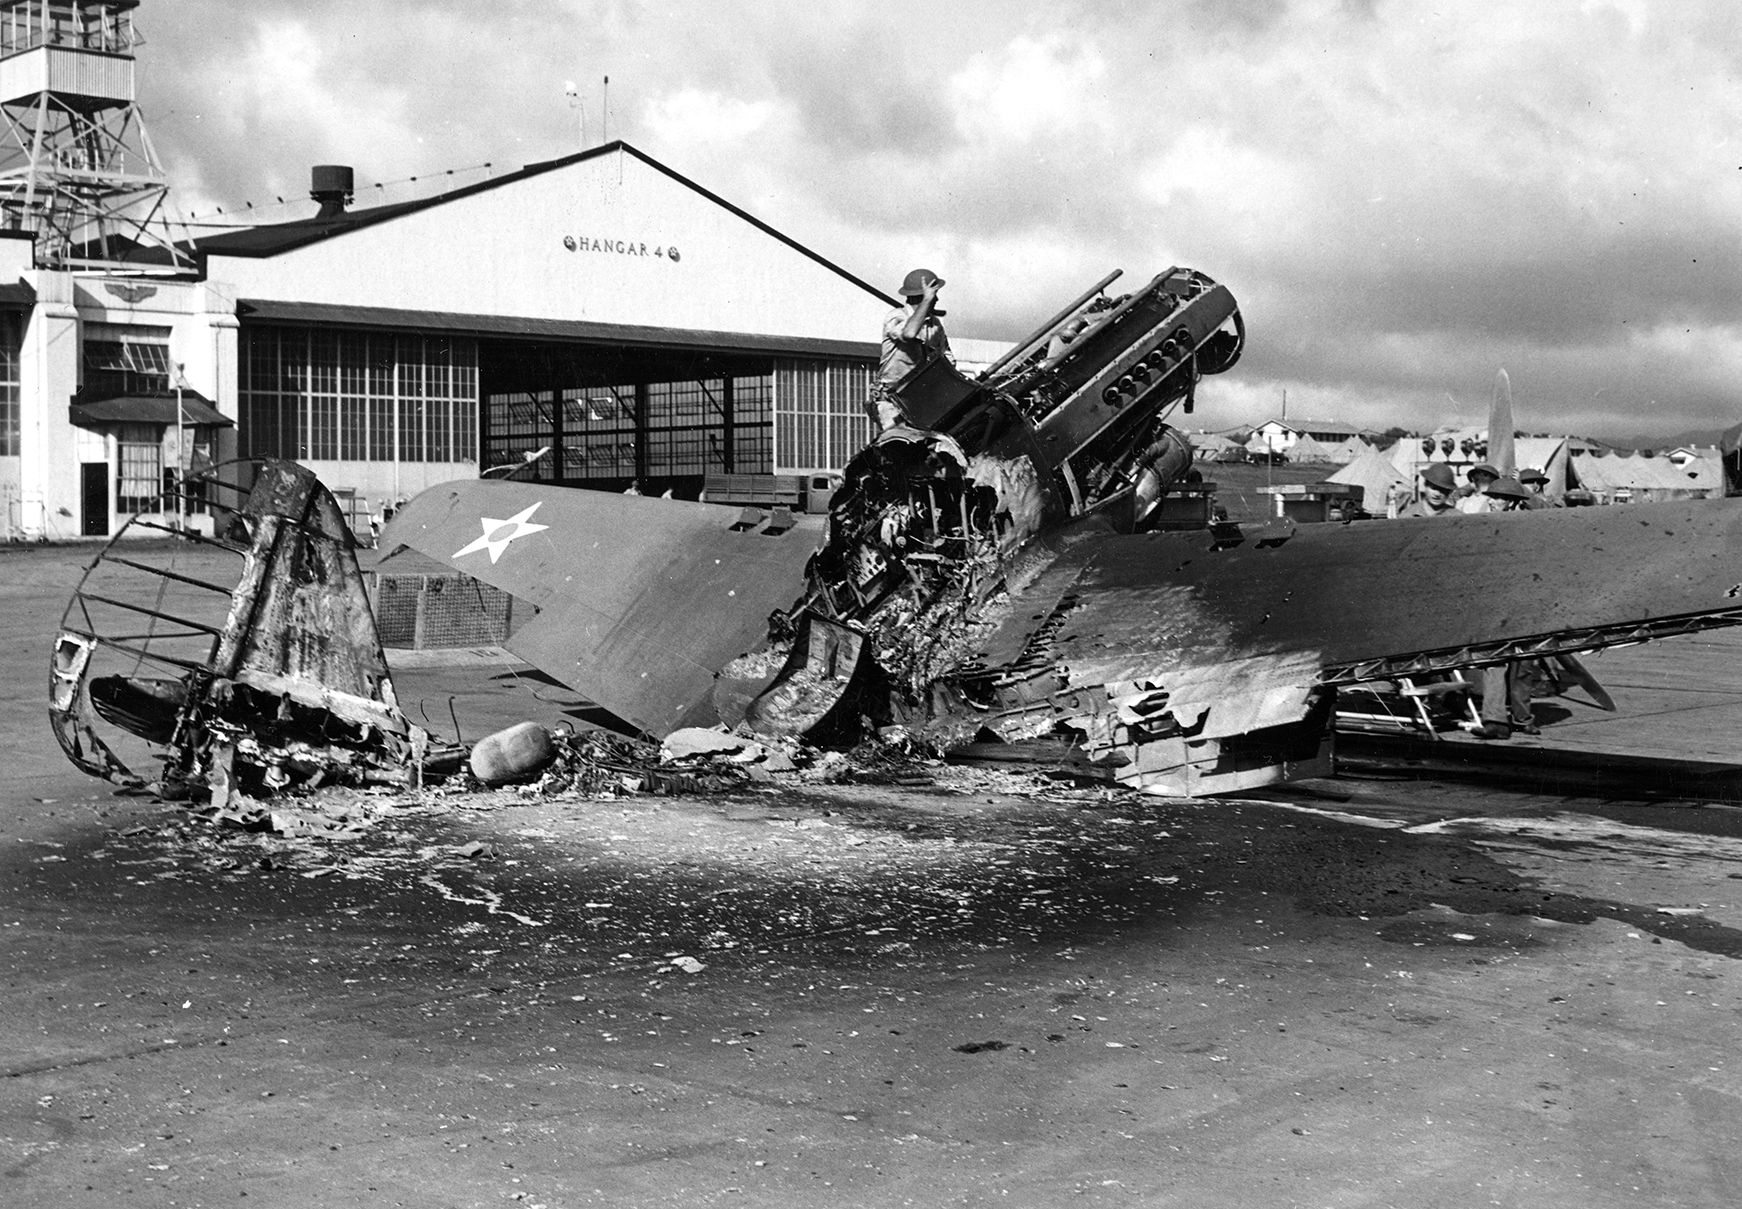 In the aftermath of the Pearl Harbor raid, soldiers examine the charred remains of a Curtiss P-40 Tomahawk fighter plane destroyed on the ground near Hangar 4 at Wheeler Airfield. Many American aircraft were shot to pieces by strafing Japanese planes on December 7, 1941. 